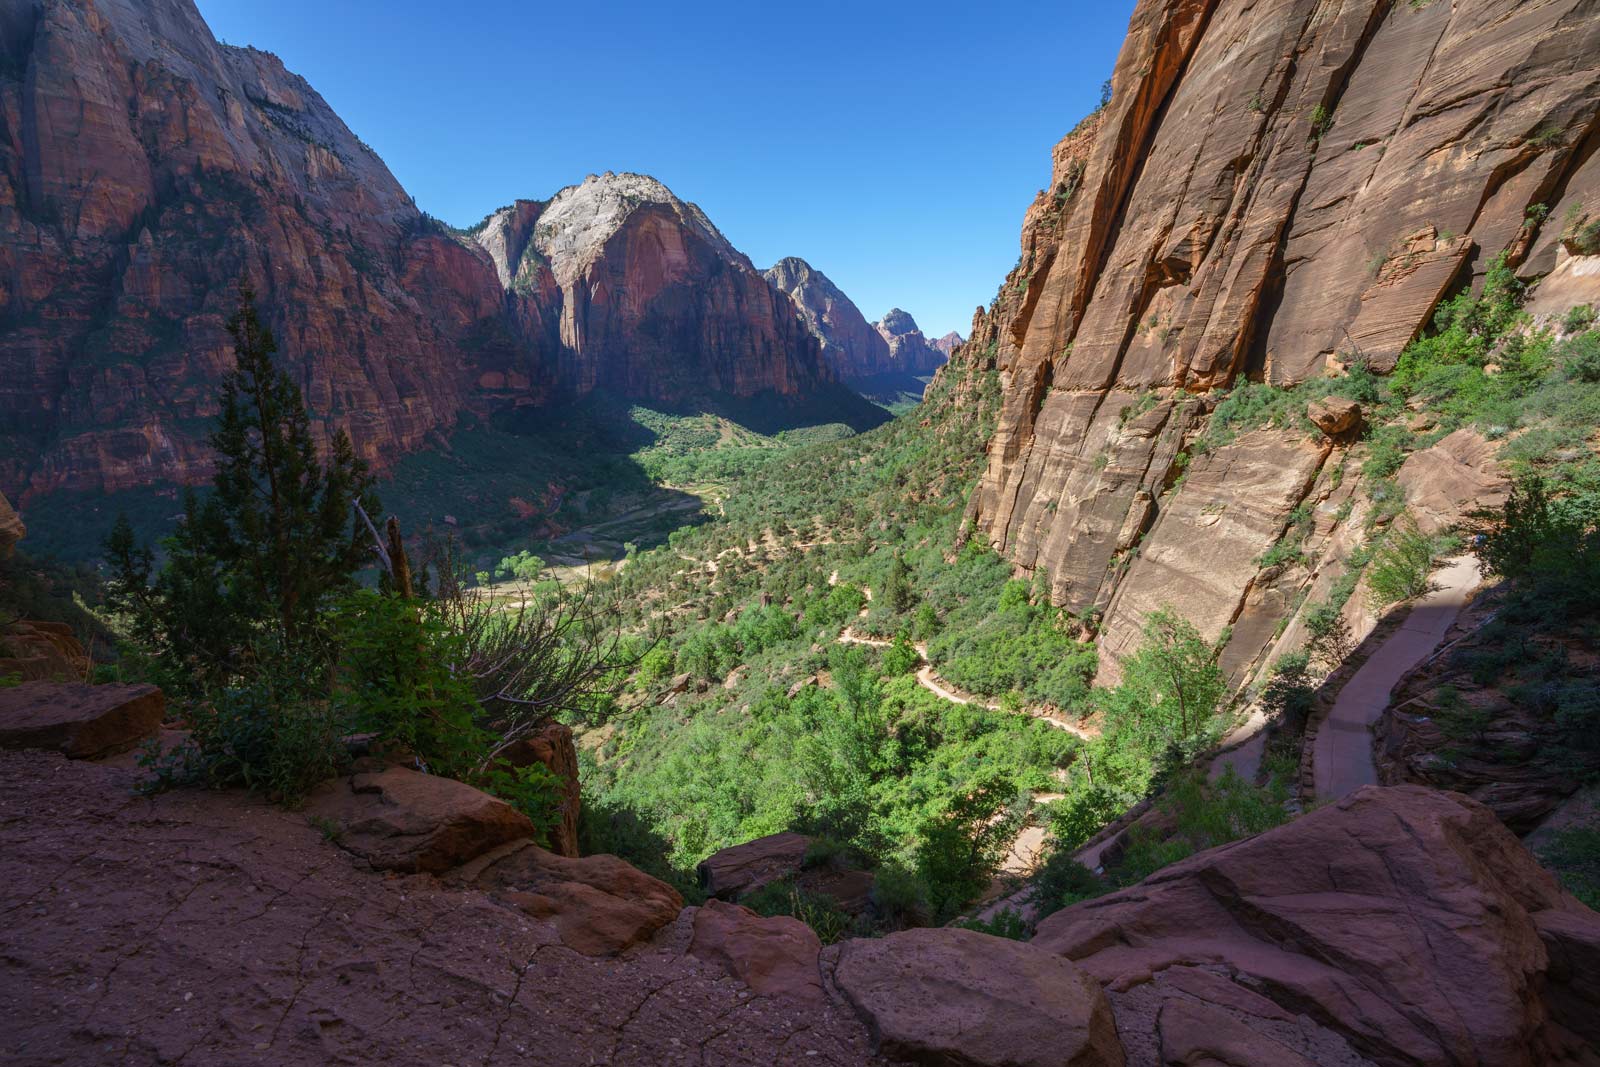 Views from the West Rim Trail in Zion National Park